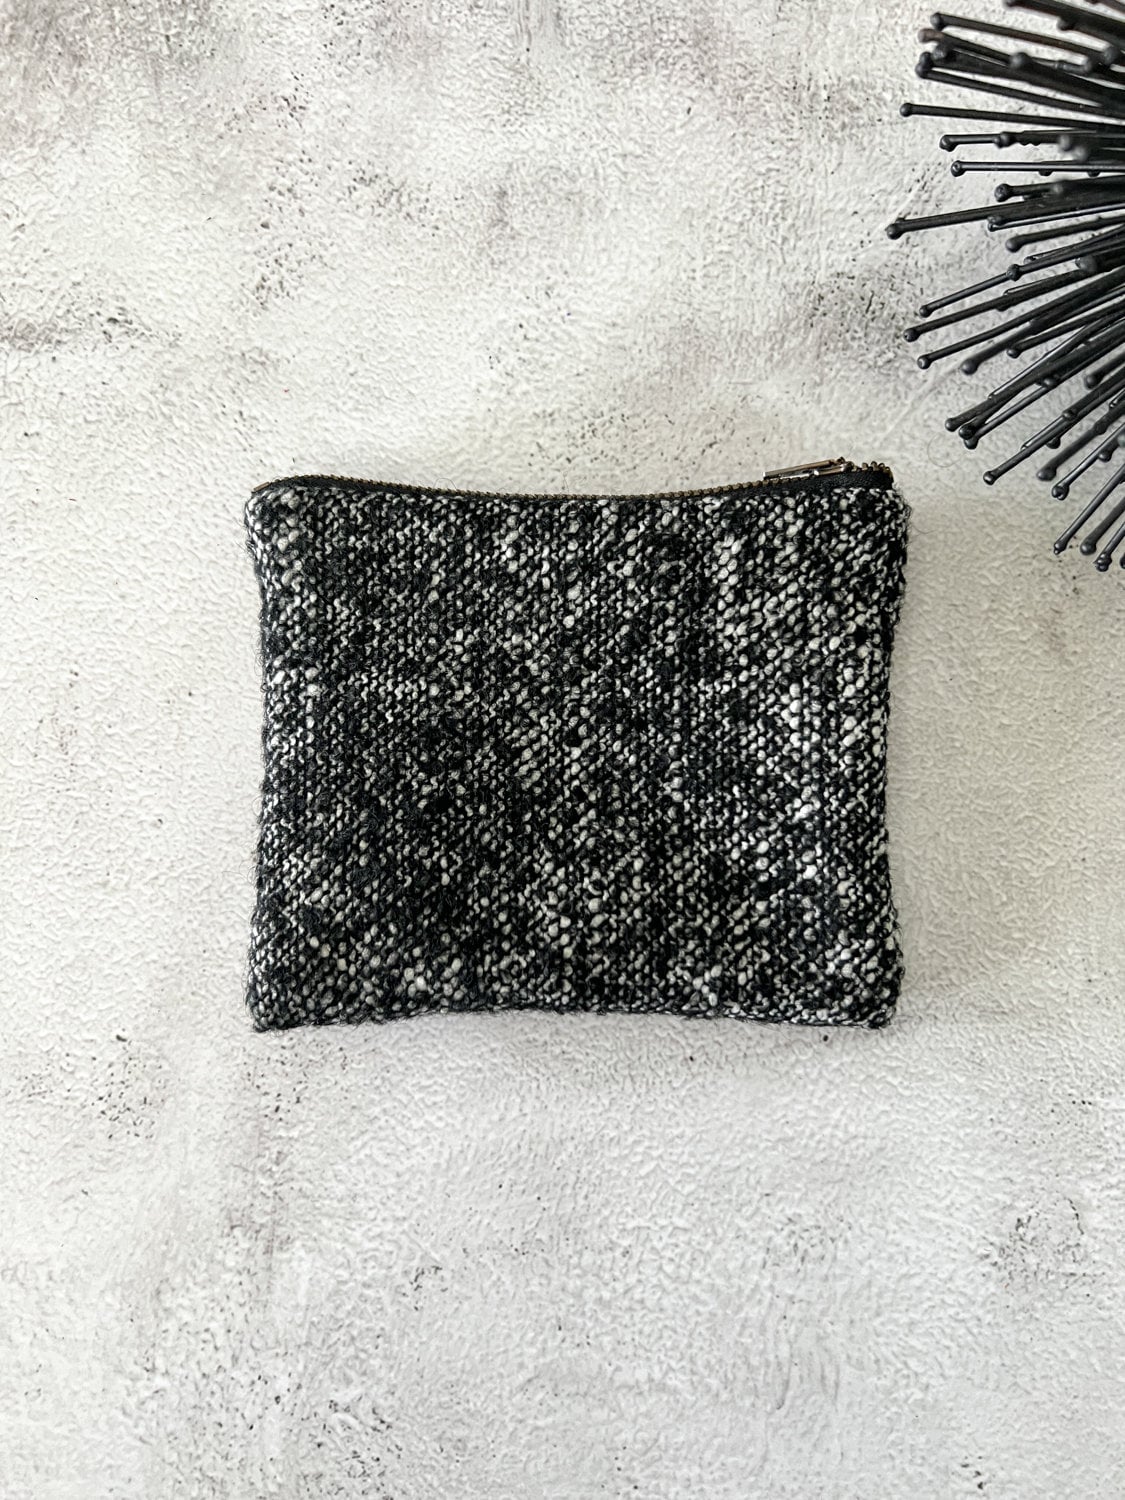 Black and White Tweed Zipper Pouch  BAGG00069